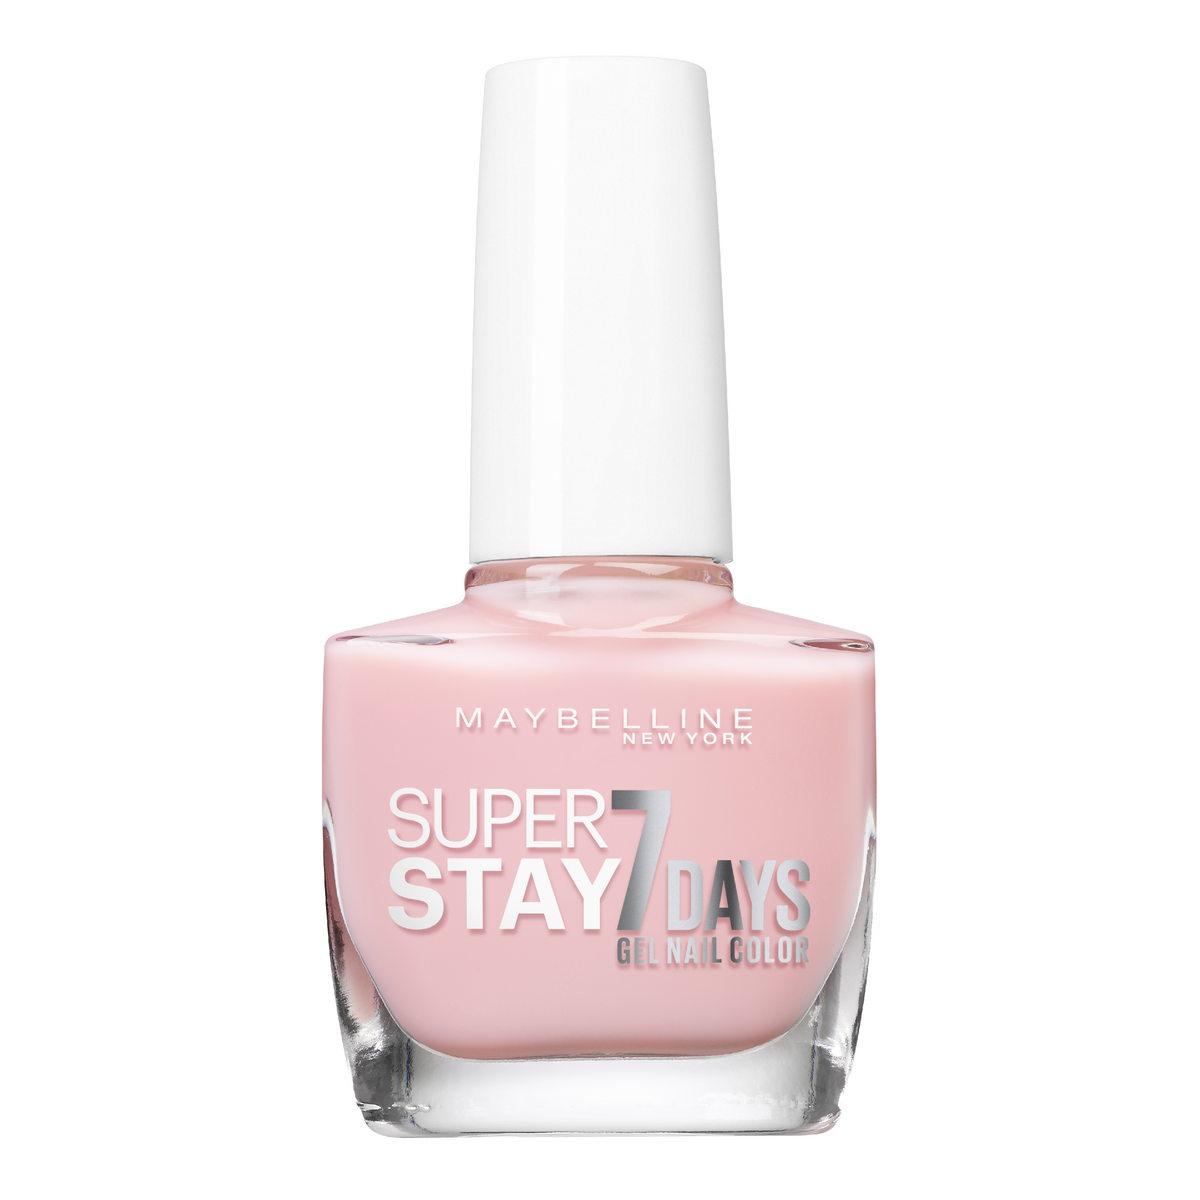 GEMEY MAYBELLINE Tenue Strong Pro vernis à ongles n°113 - Barely sheer 10ml